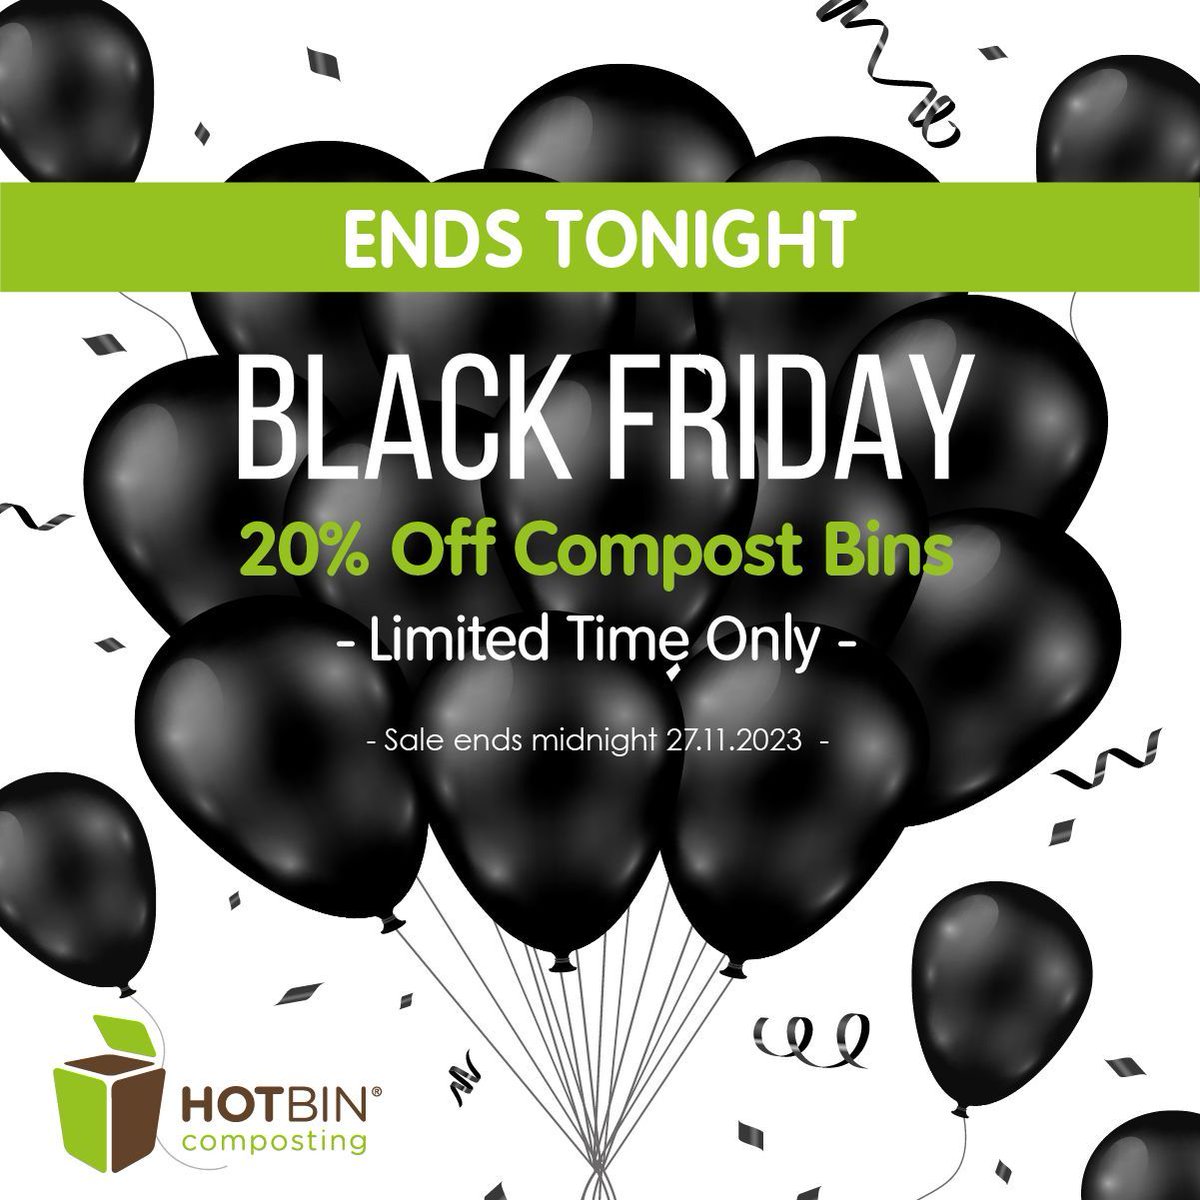 Our hottest ever Black Friday sale ends tonight. Save 20% off a HOTBIN and kick-start your composting in the new year. Buy online: hotbincomposting.com